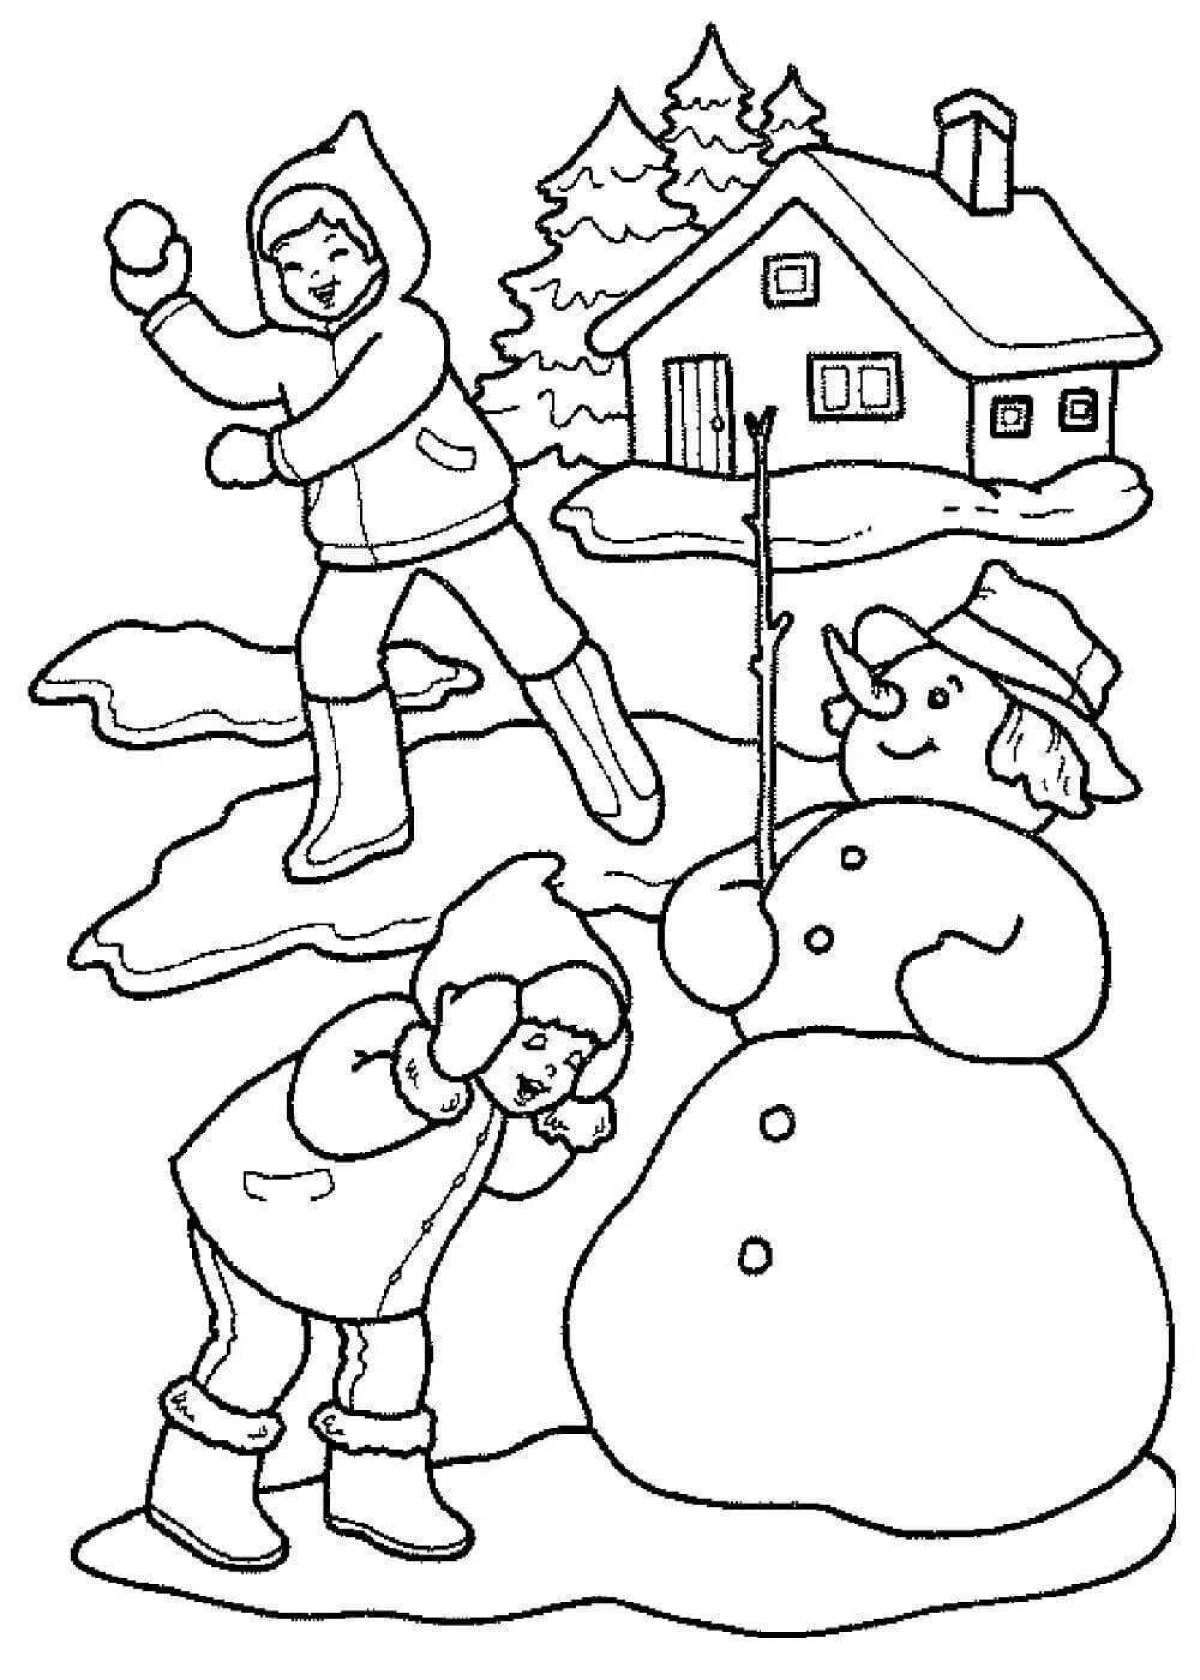 Winter holidays for kids #3